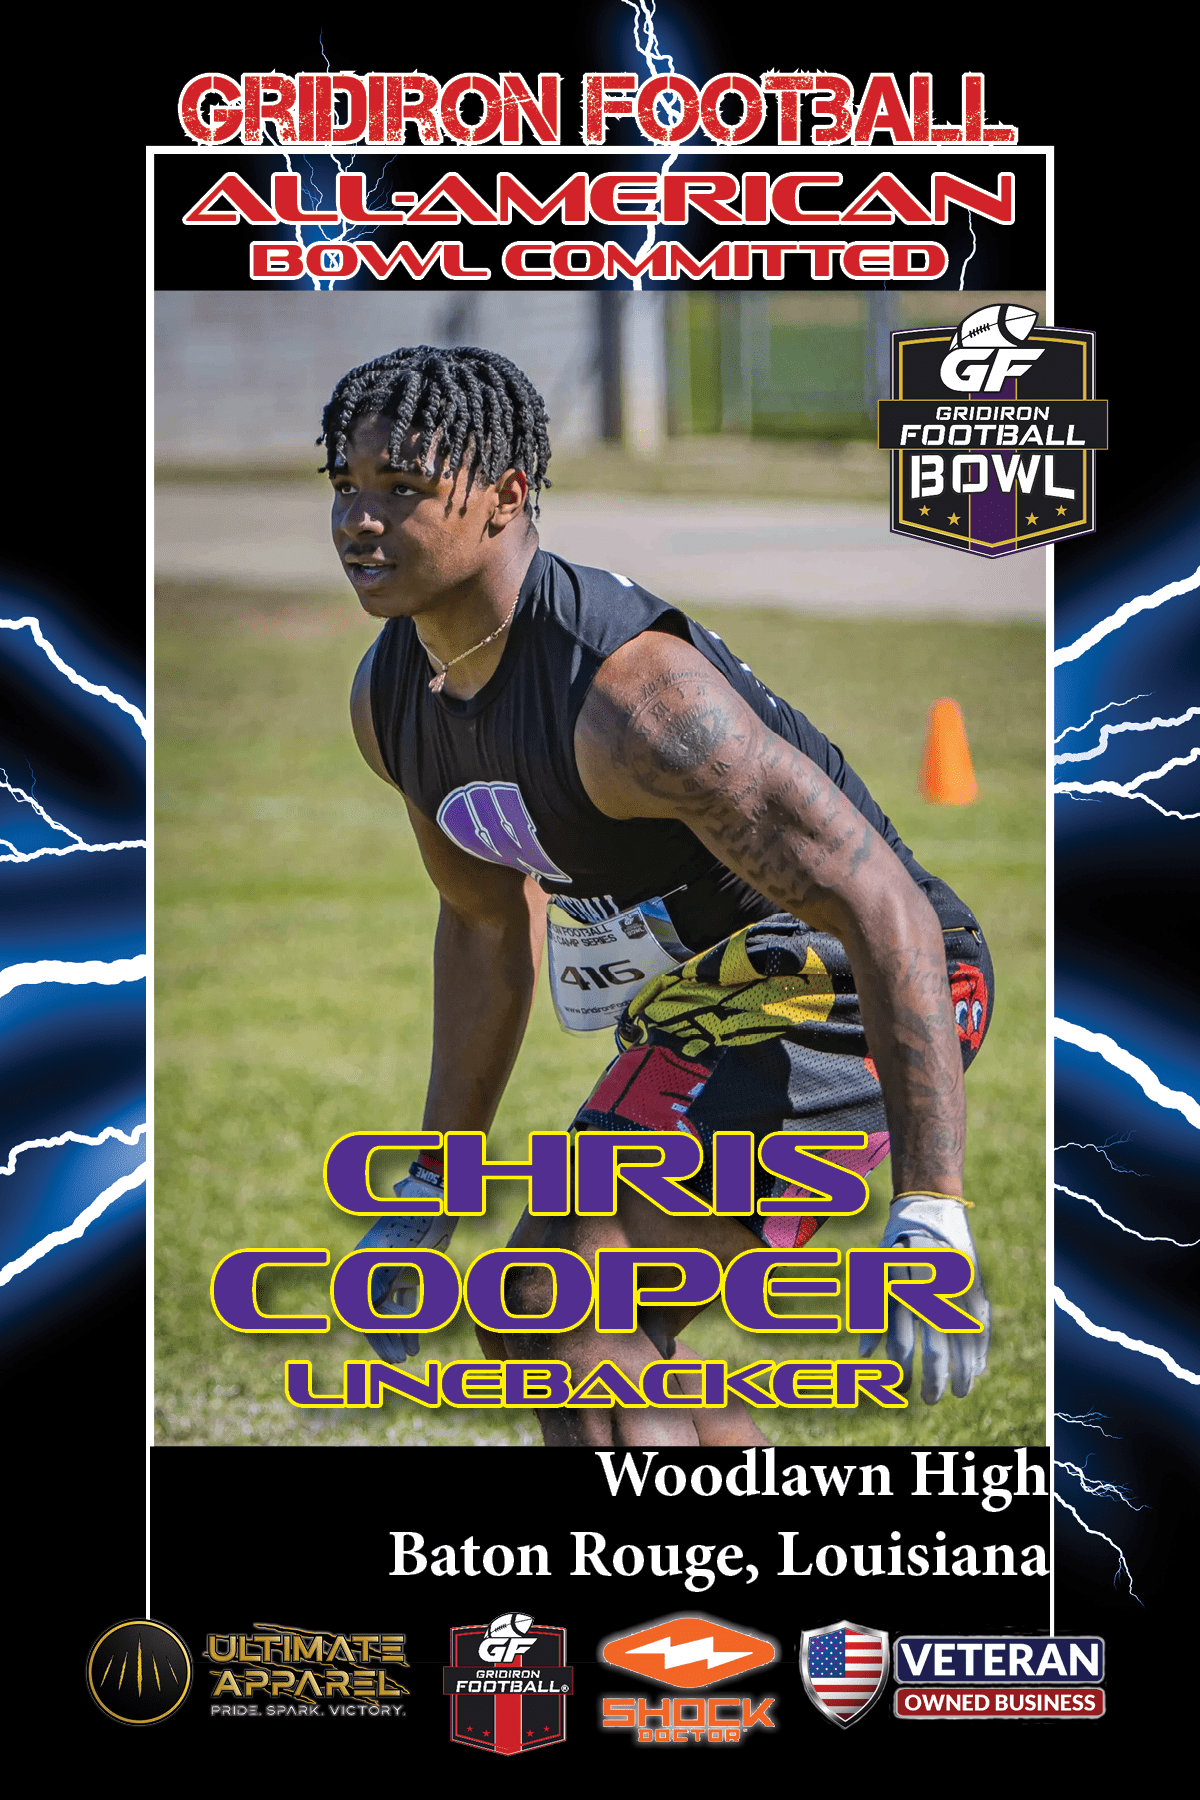 BREAKING NEWS: Woodlawn High School (Baton Rouge, LA) LB Chris Cooper Commits To The Gridiron Football All-American Bowl Game